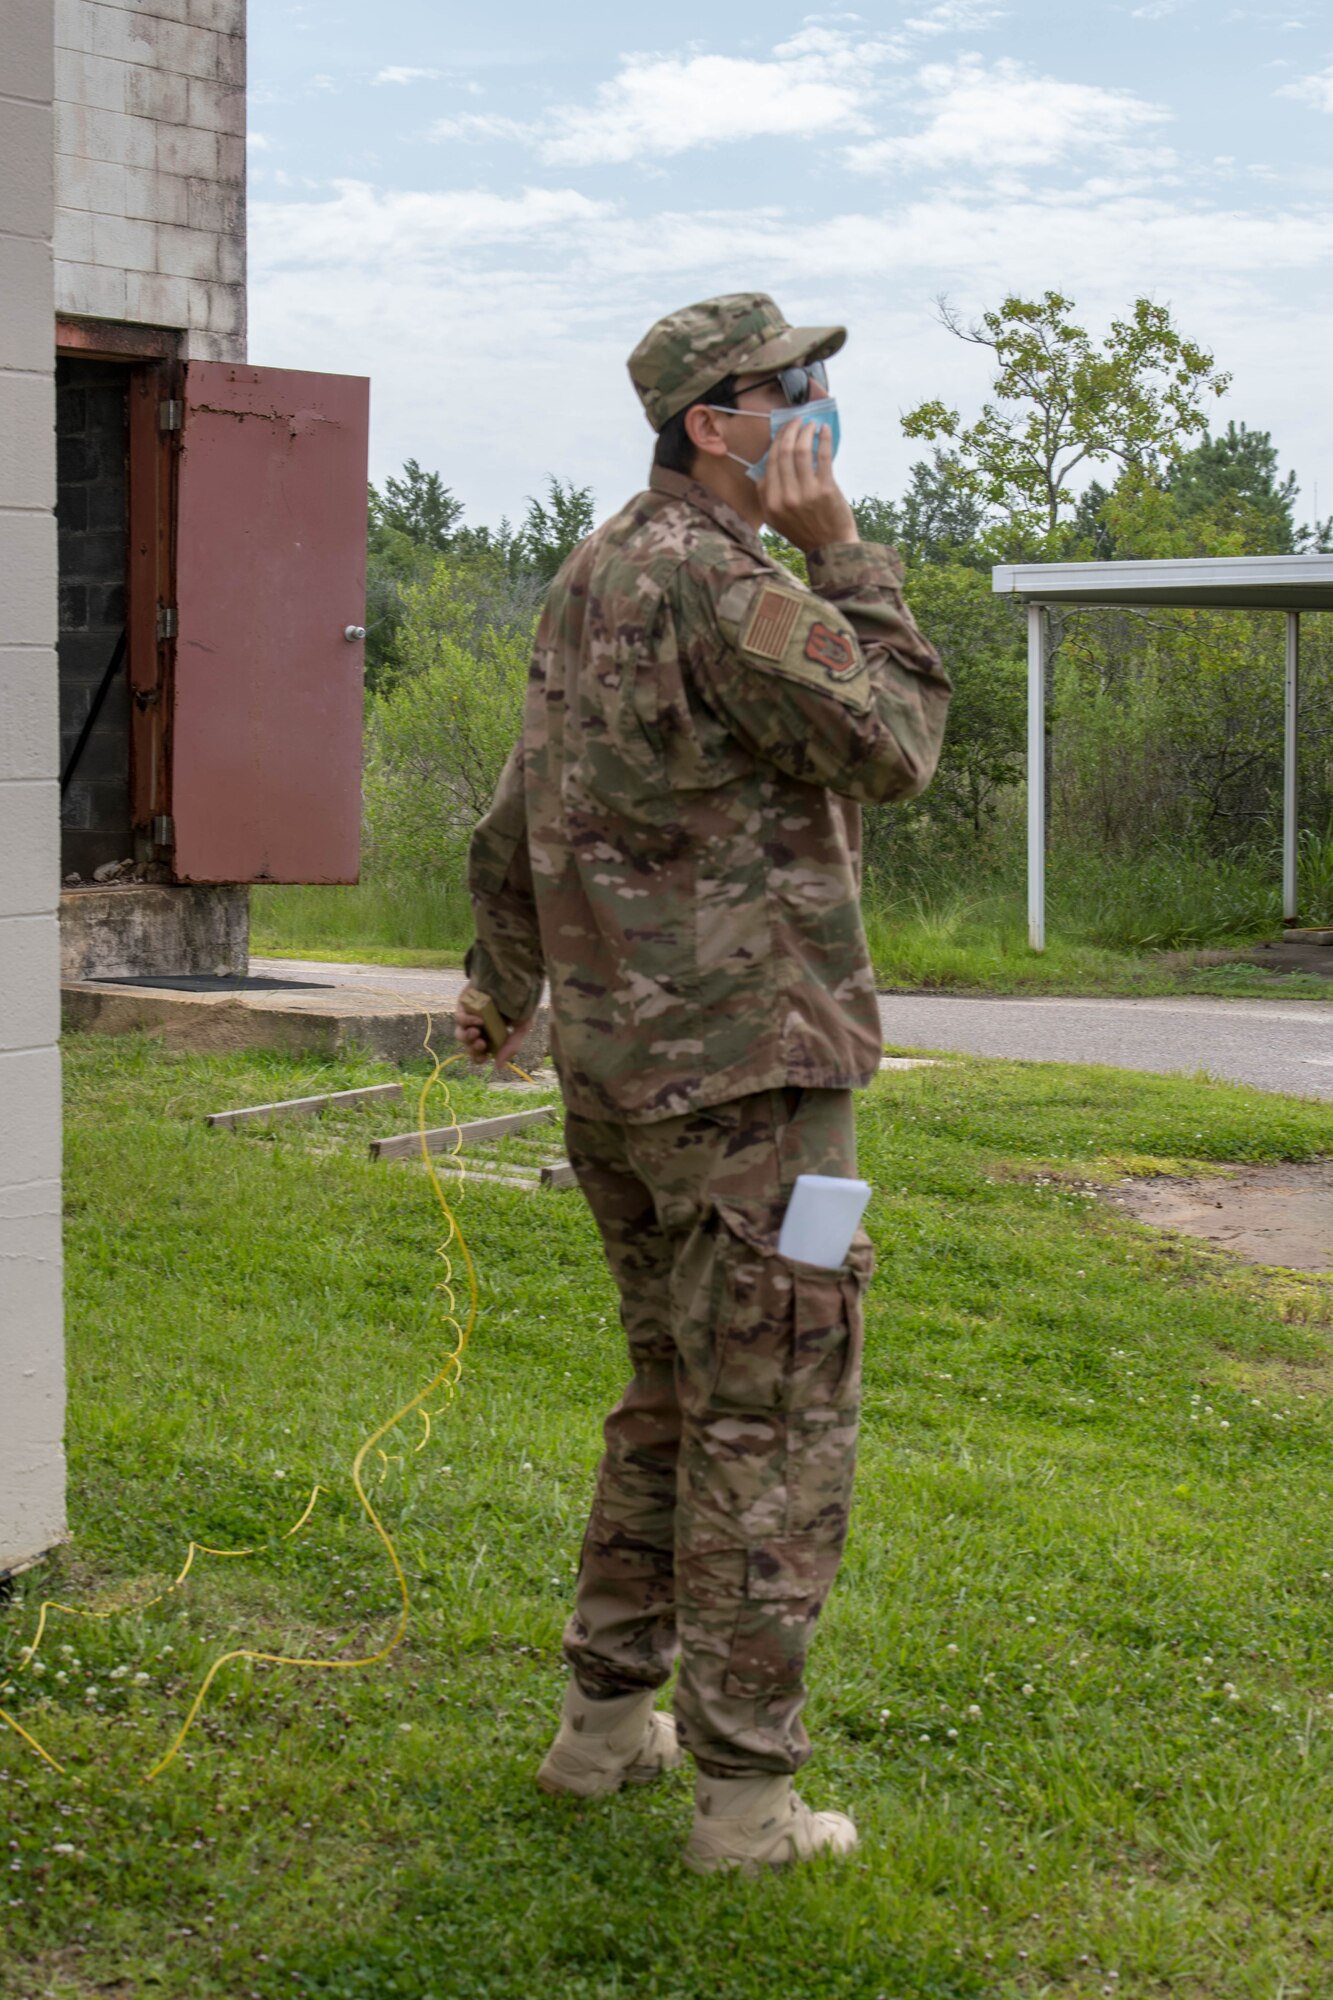 Explosive ordnance disposal technicians keep up-to-date on their training, even with the restrictions placed on the base brought about by COVID-19.